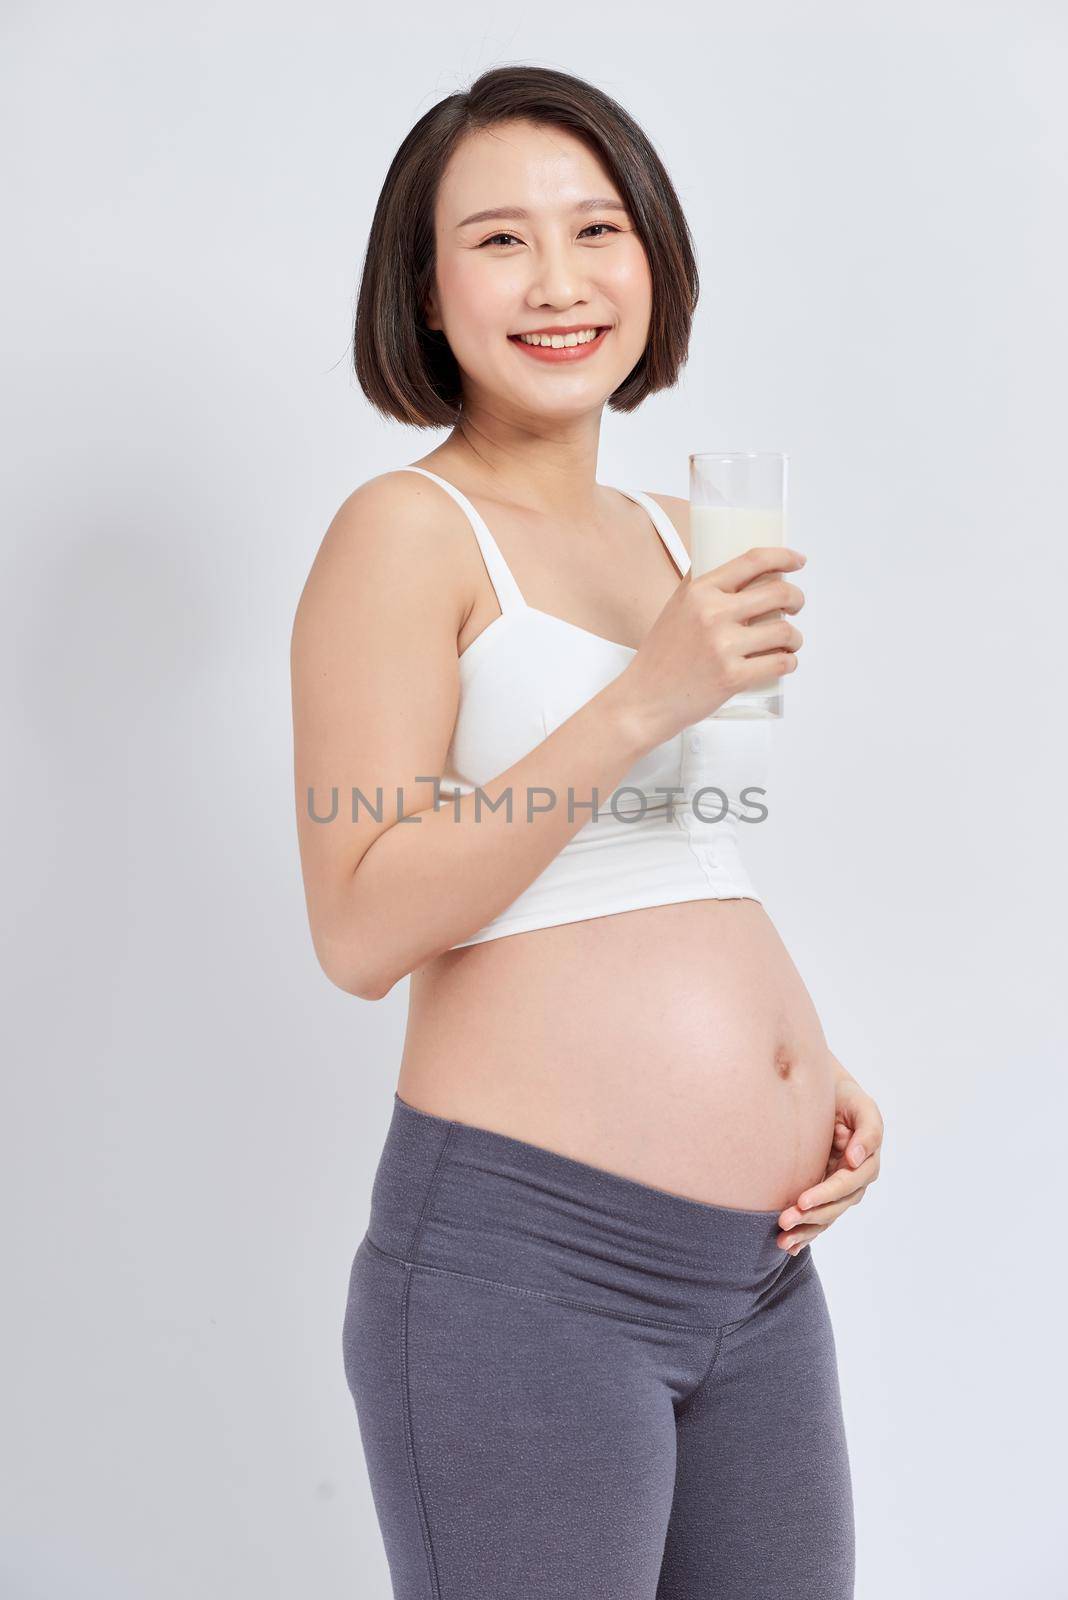 Pregnant woman holding glass of milk in her hand good healty, isolated on white background.